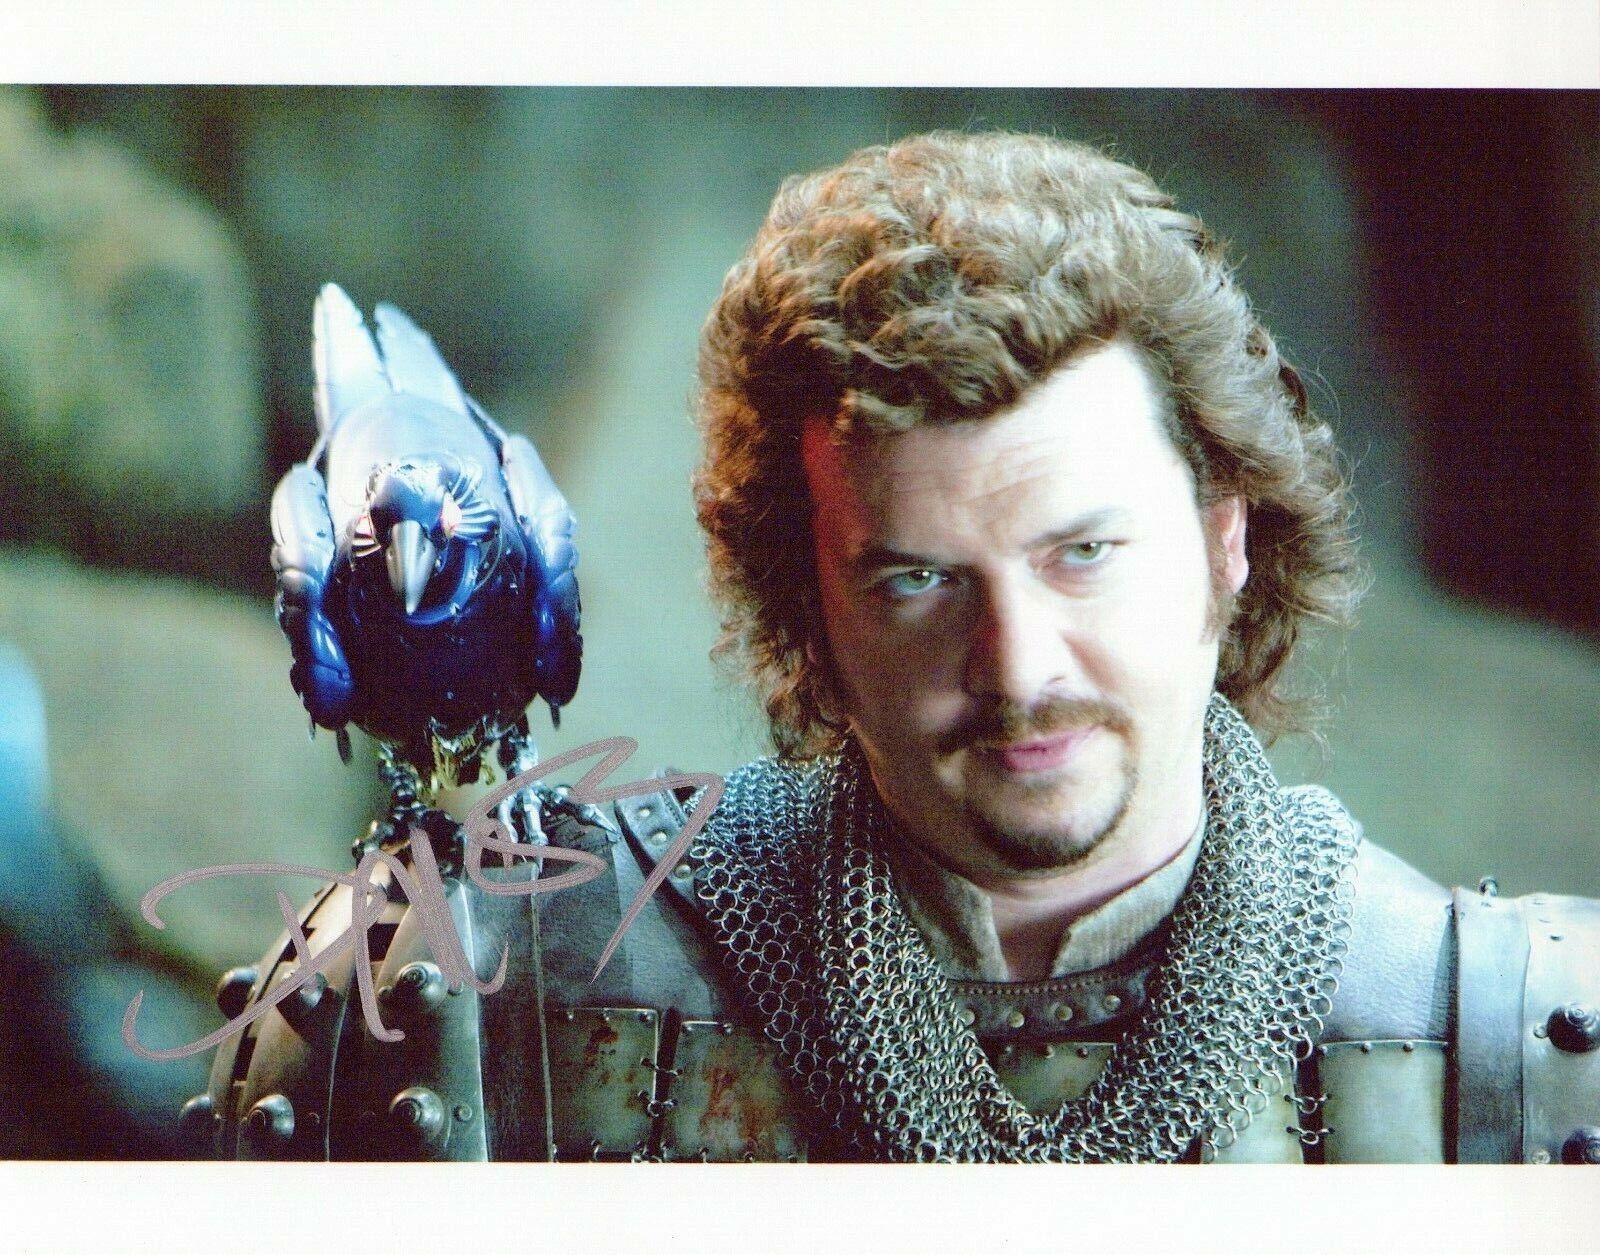 Danny McBride Your Highness autographed Photo Poster painting signed 8x10 #5 Thadeous